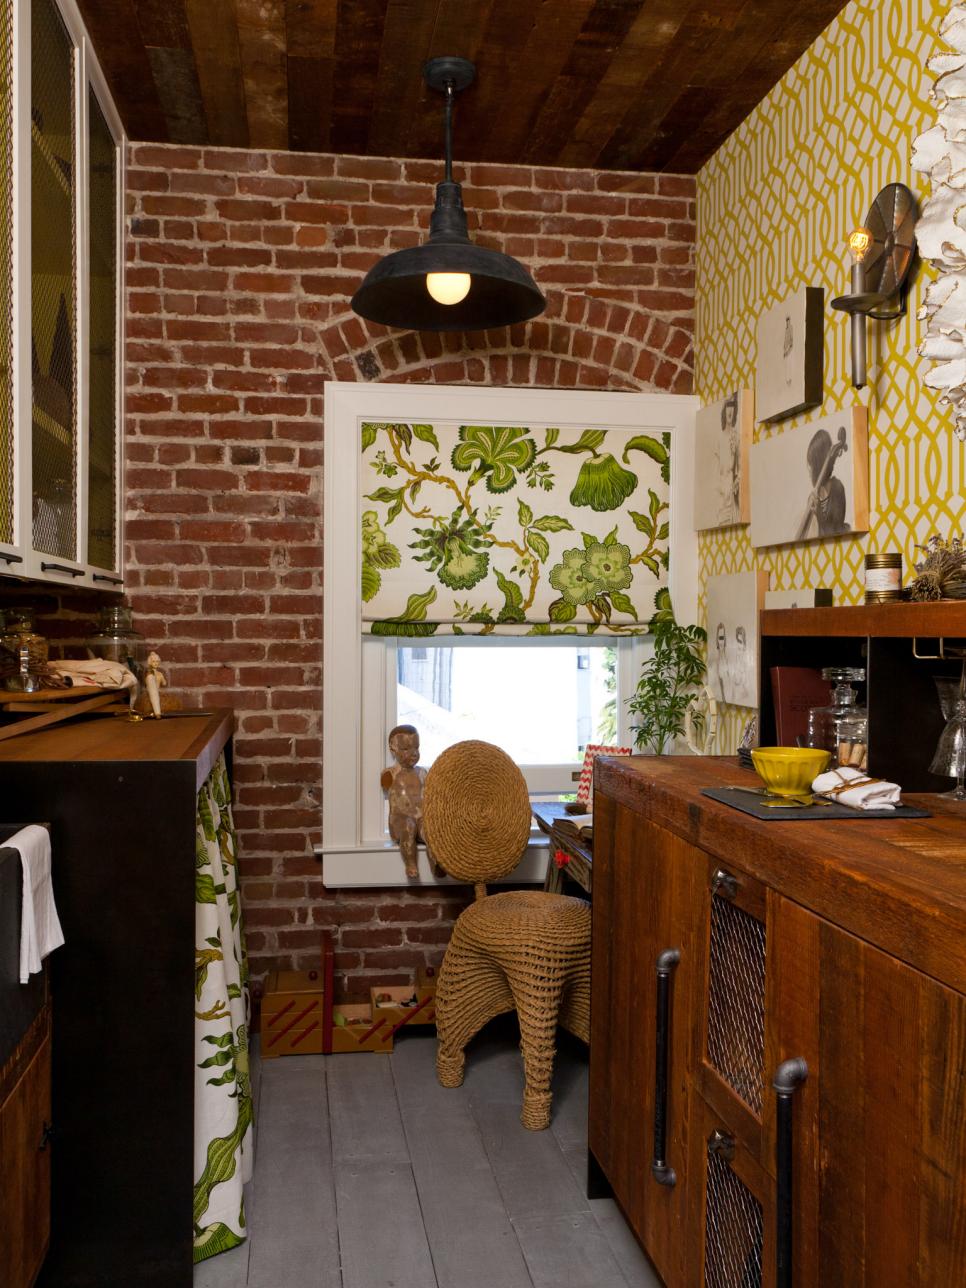 Utility Room With Brick Walls, Yellow Trellis Wallpaper and Wood Cabinet